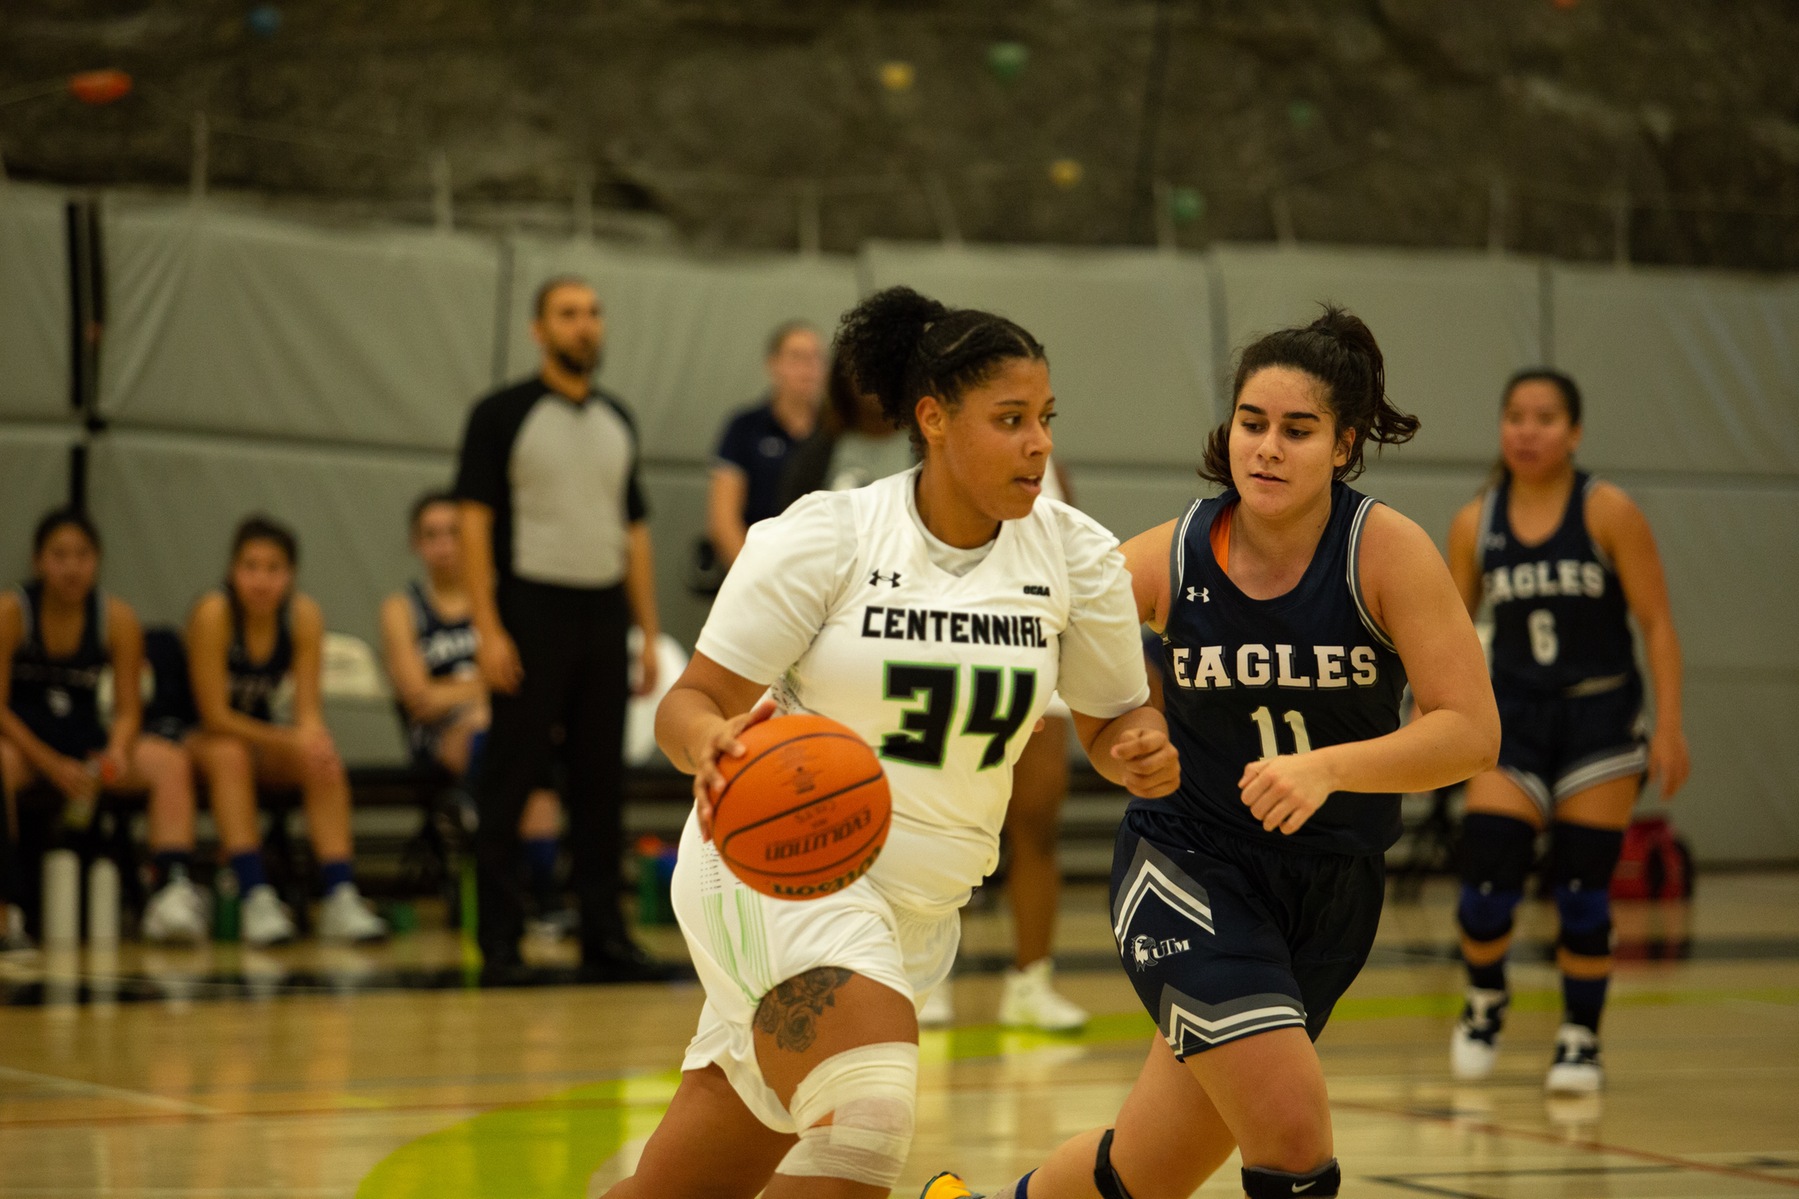 Centennial's Olivia Thomson drives past UTM's Pinar Armagan-Kahram during exhibition action at the Athletic and Wellness Centre between the Colts and the Eagles. (Nicole Ventura/Colts Media)